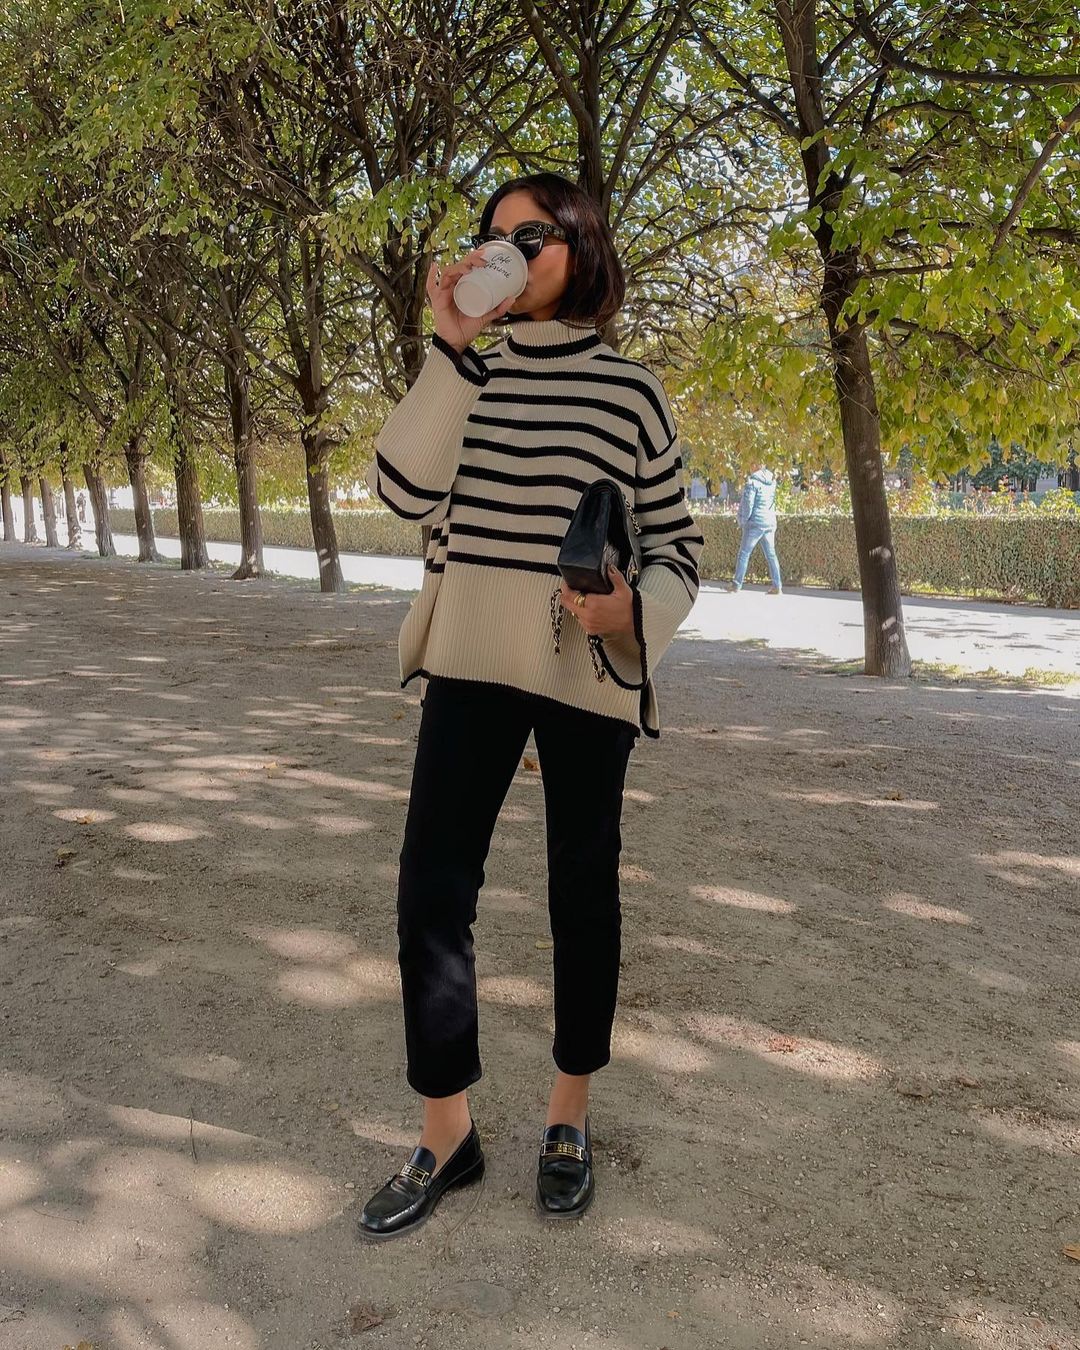 @cocobeautea wears a Breton stripe jumper and black trousers for a chic autumn outfit